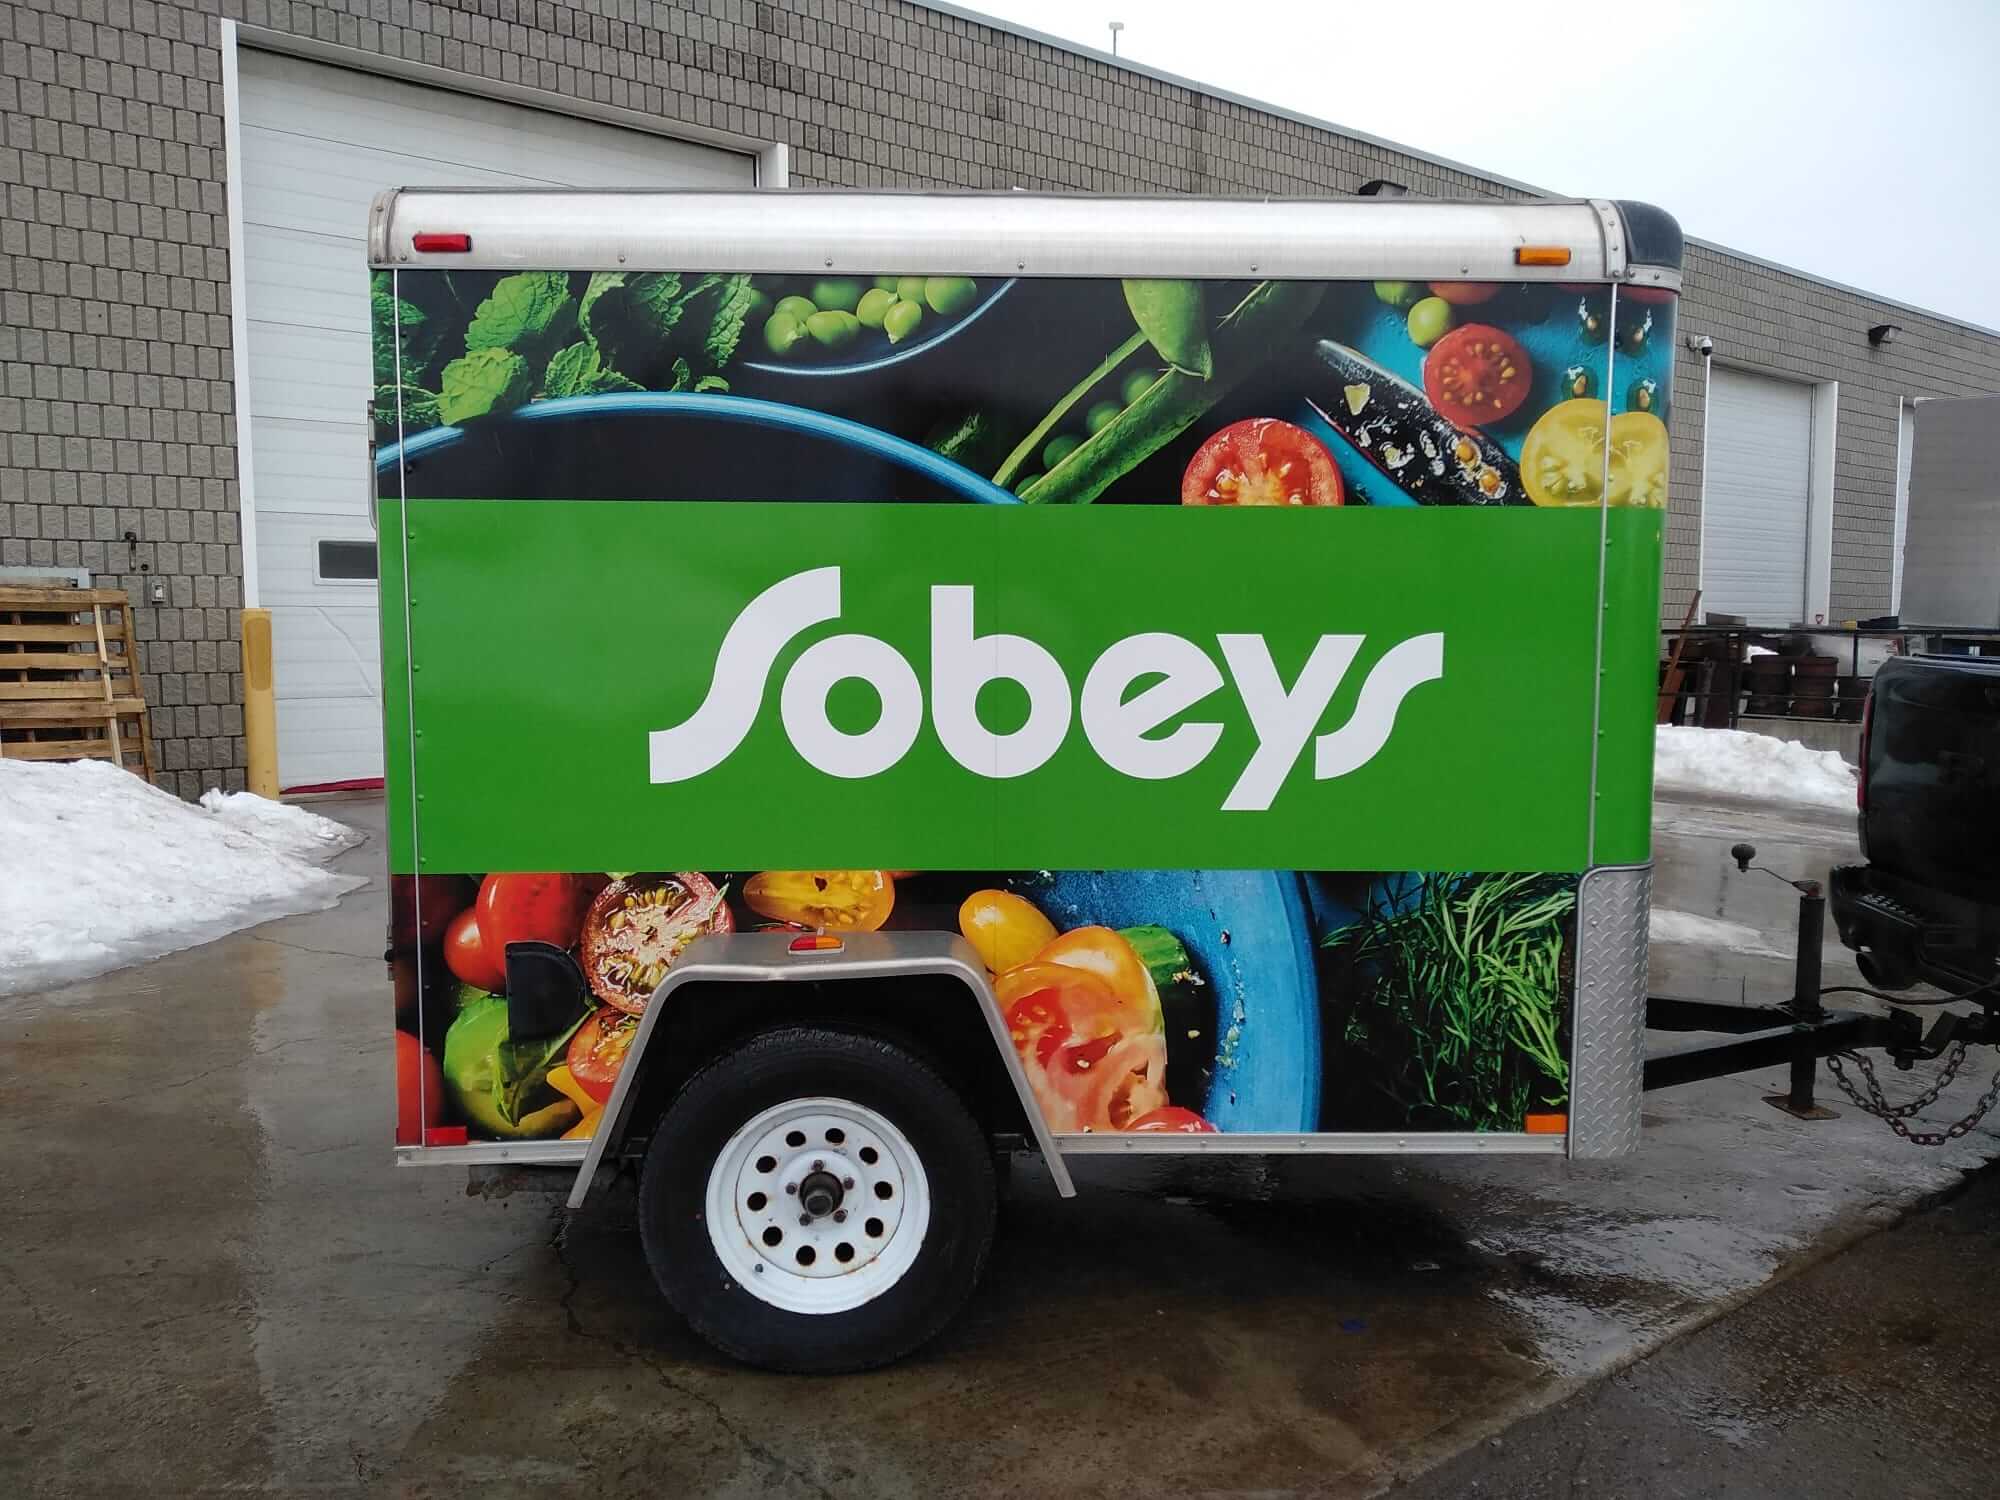 PMTC Honorable Mention for the Identity Fleet category designed by Sobeys and installed by Turbo Images